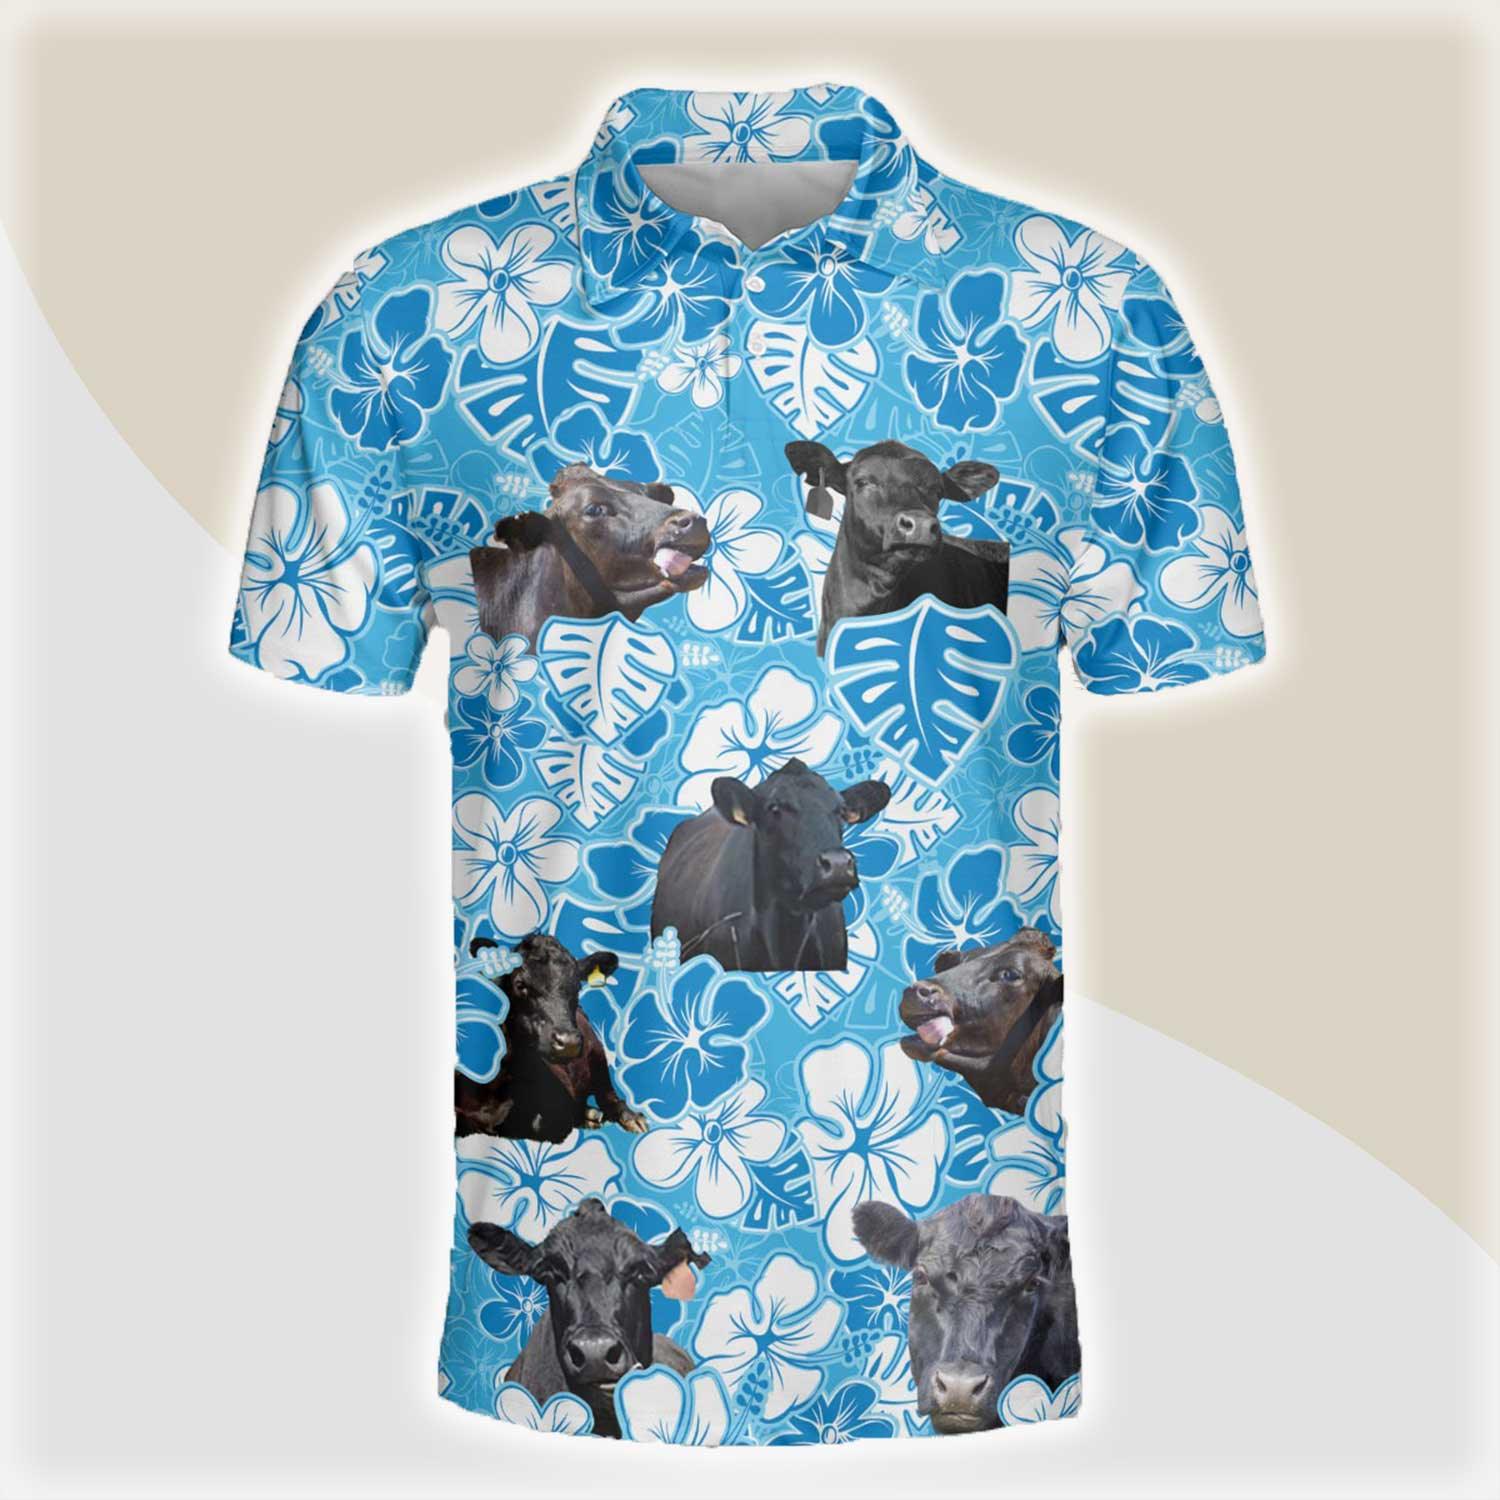 Black Angus Men Polo Shirts - Black Angus Blue Floral Pattern Button Shirts For Men - Perfect Gift For Black Angus Lovers, Cattle Lovers - Amzanimalsgift